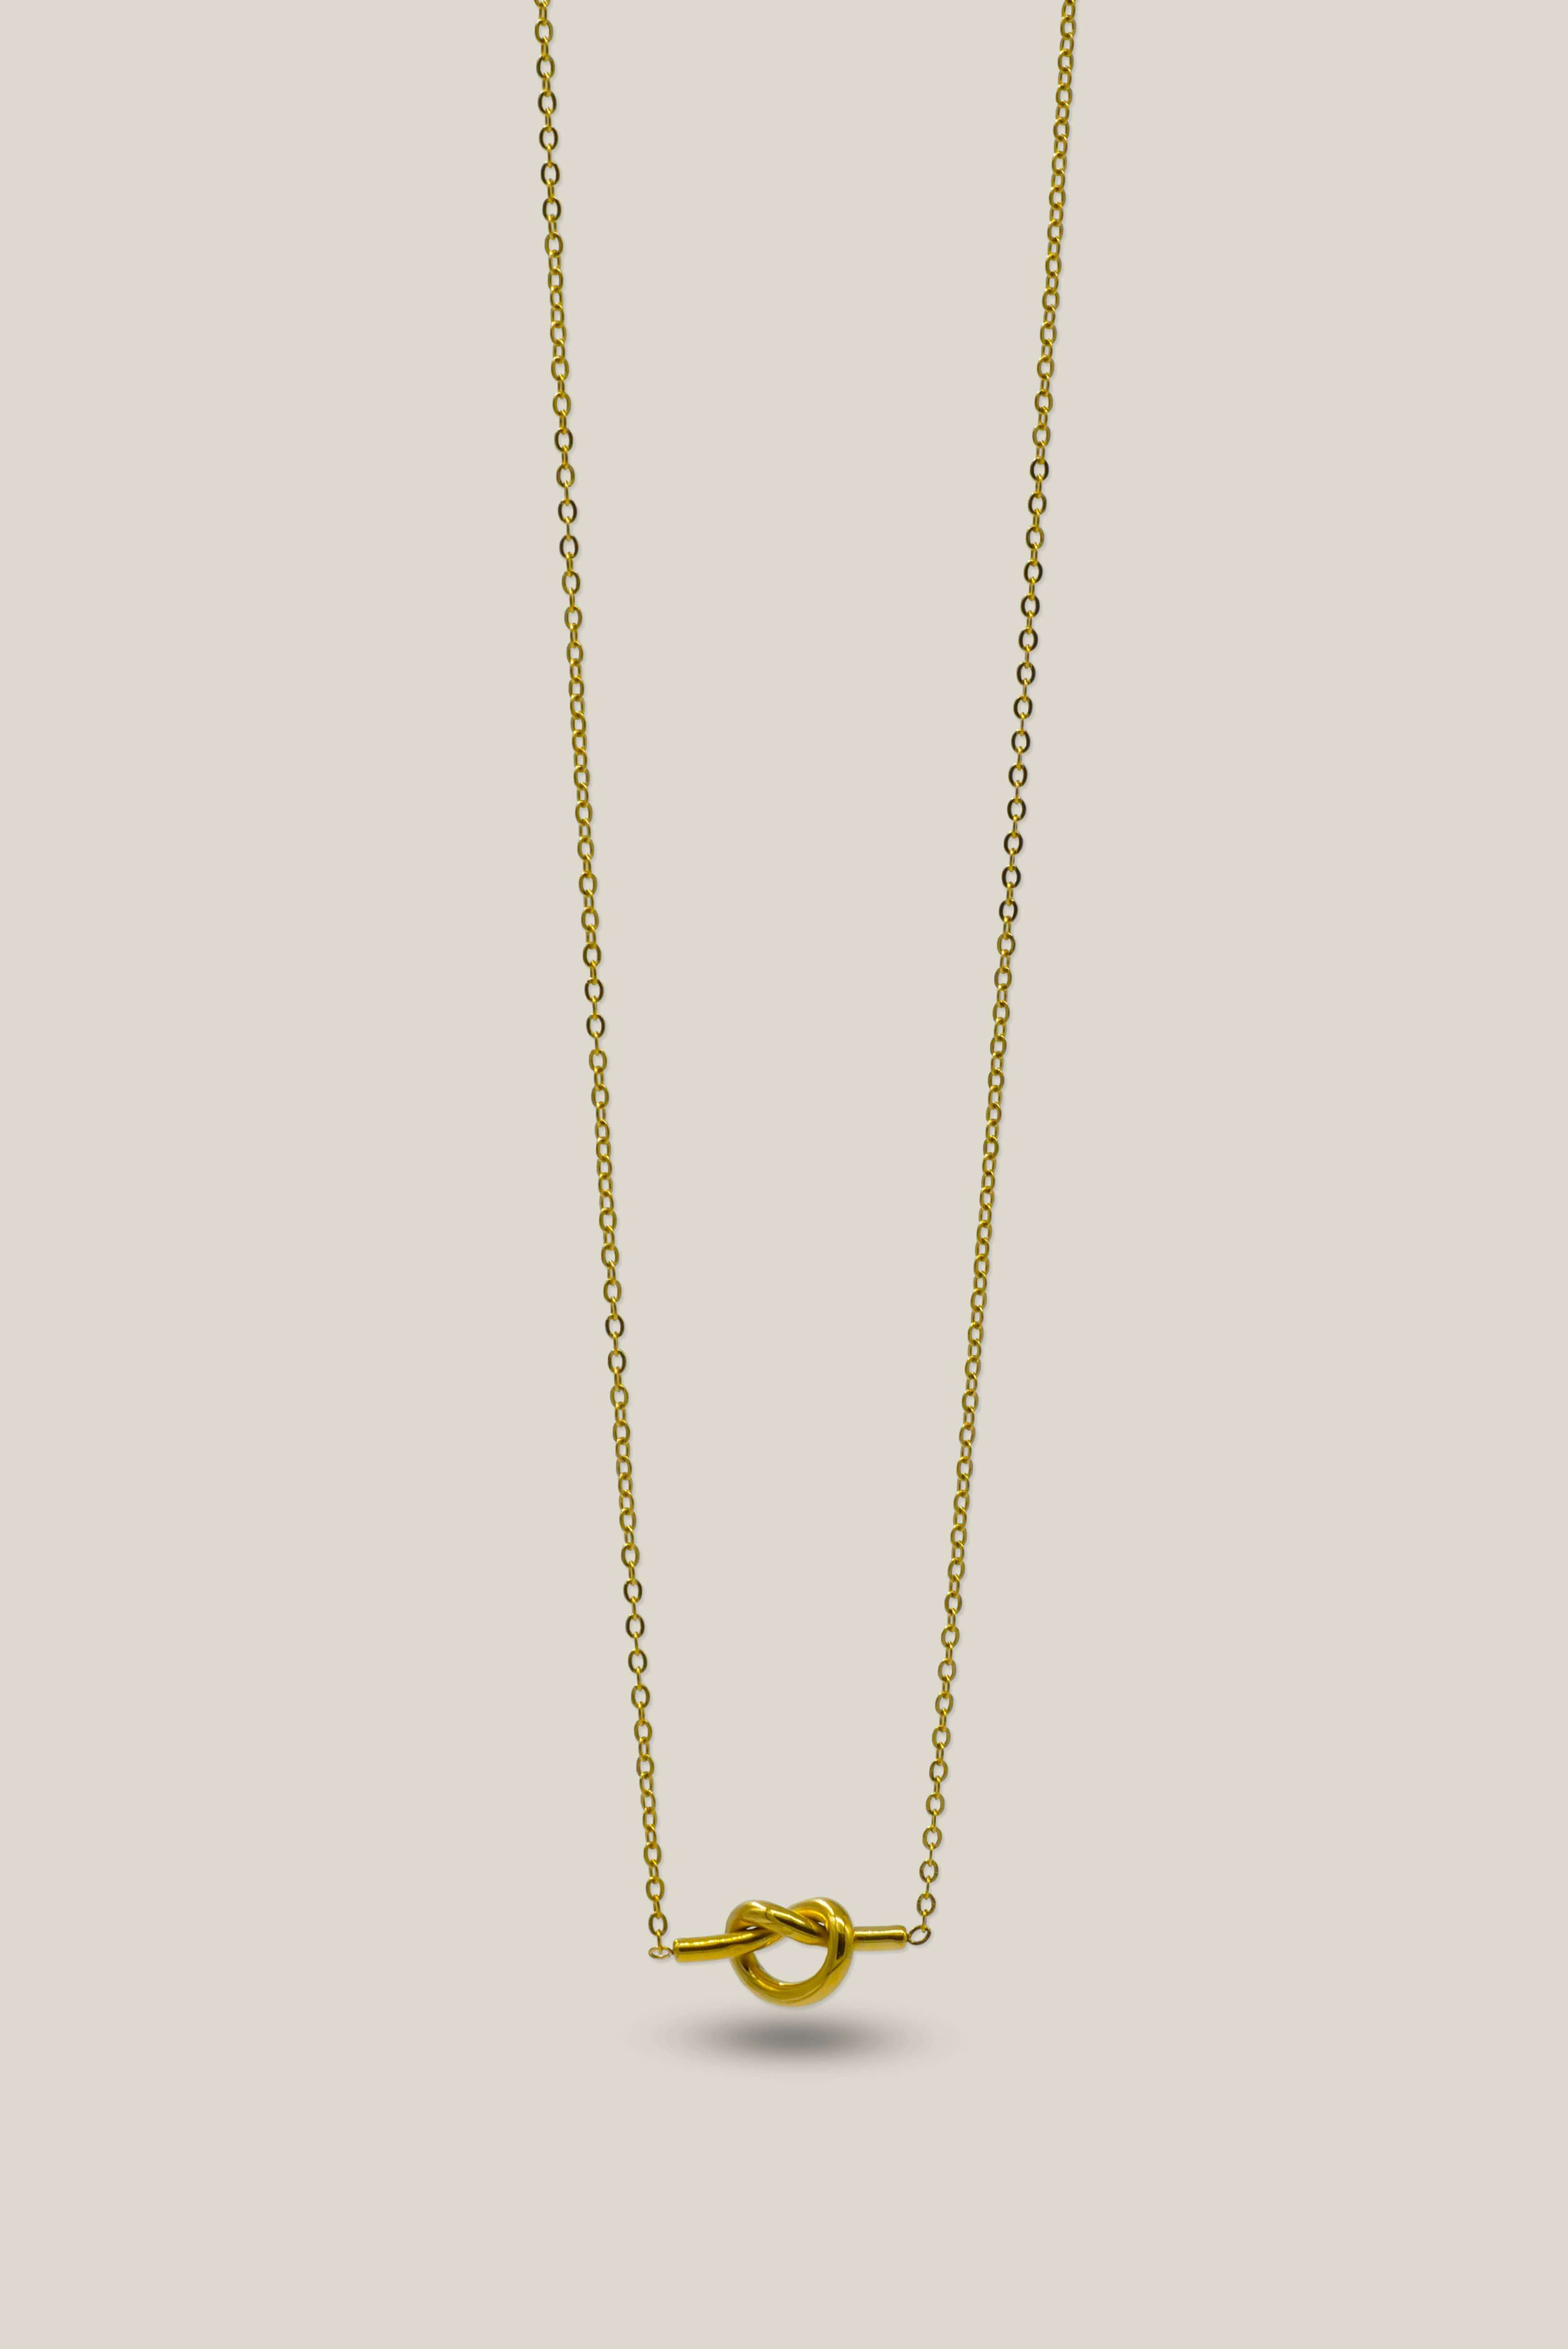 KNOT GOLD (NECKLACE)